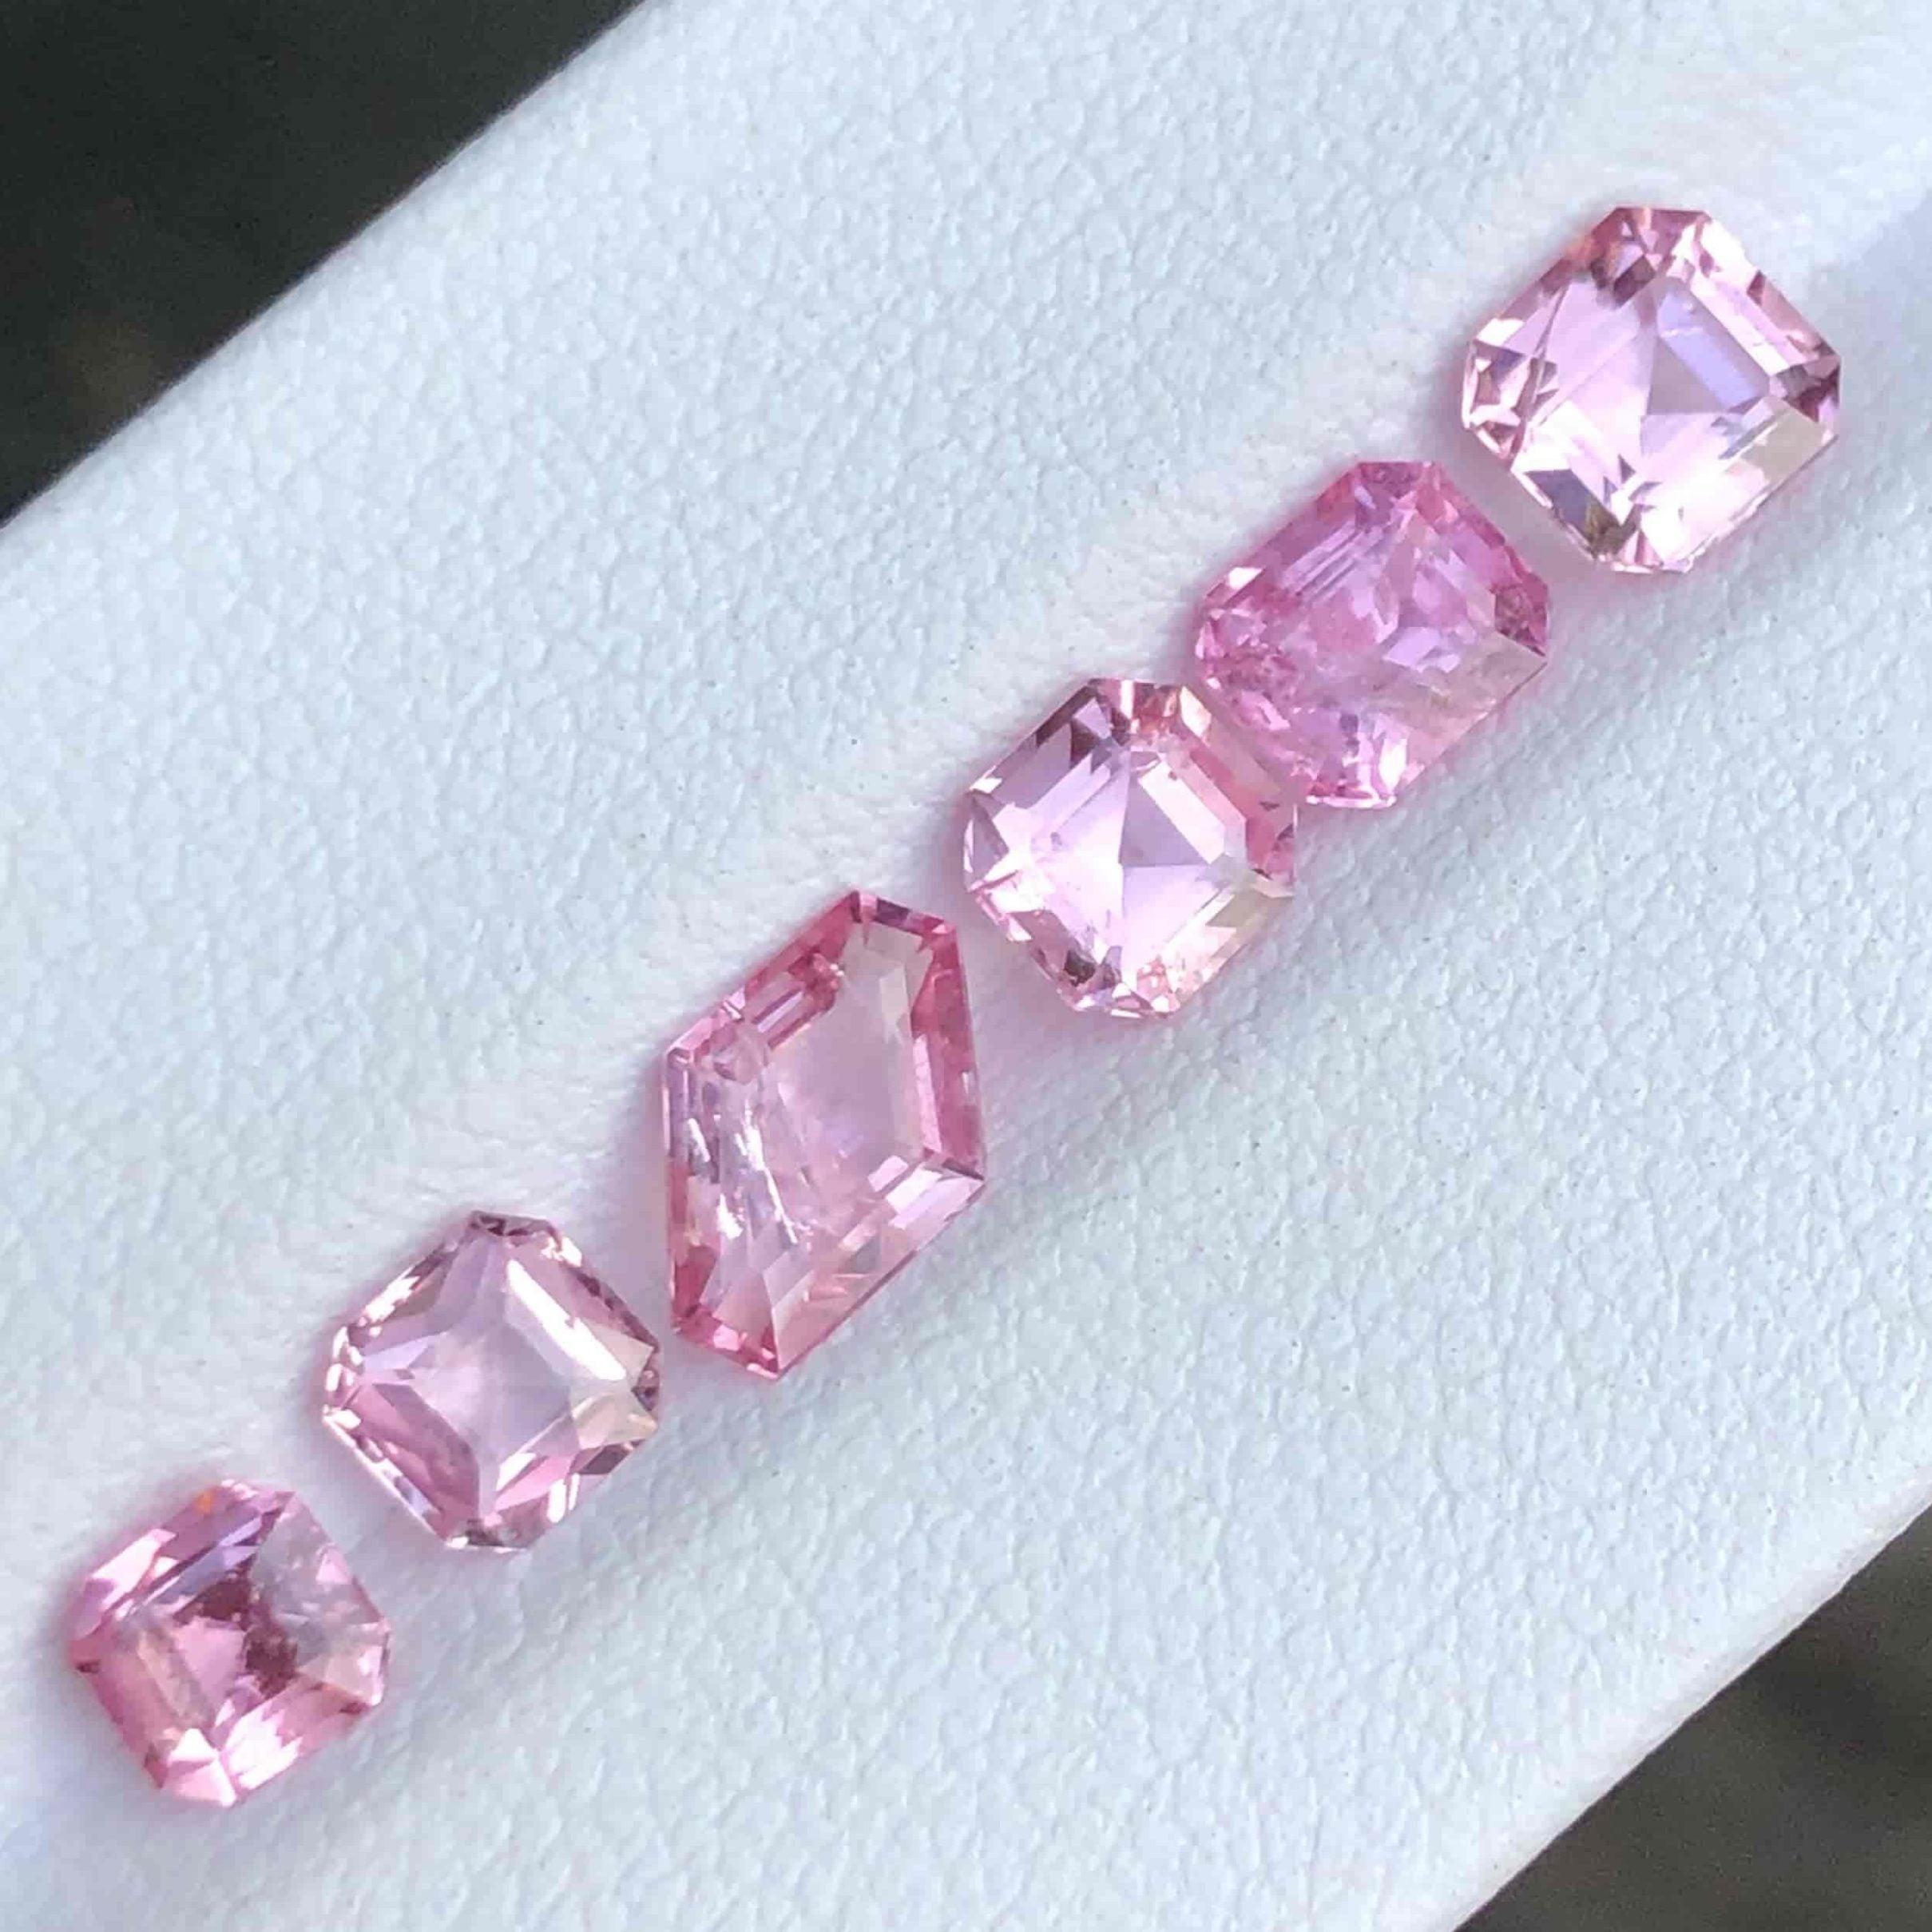 Gemstone Type Pink Spinel Gemstones Lot
Weight 4.40 carats
Individual Weight 0.90, 0.80, 0.70, 0.75, 0.45 and 0.40 carats
Clarity Slightly Included (SI)
Origin Tajikistan
Treatment None





Indulge in the captivating allure of this exclusive lot of